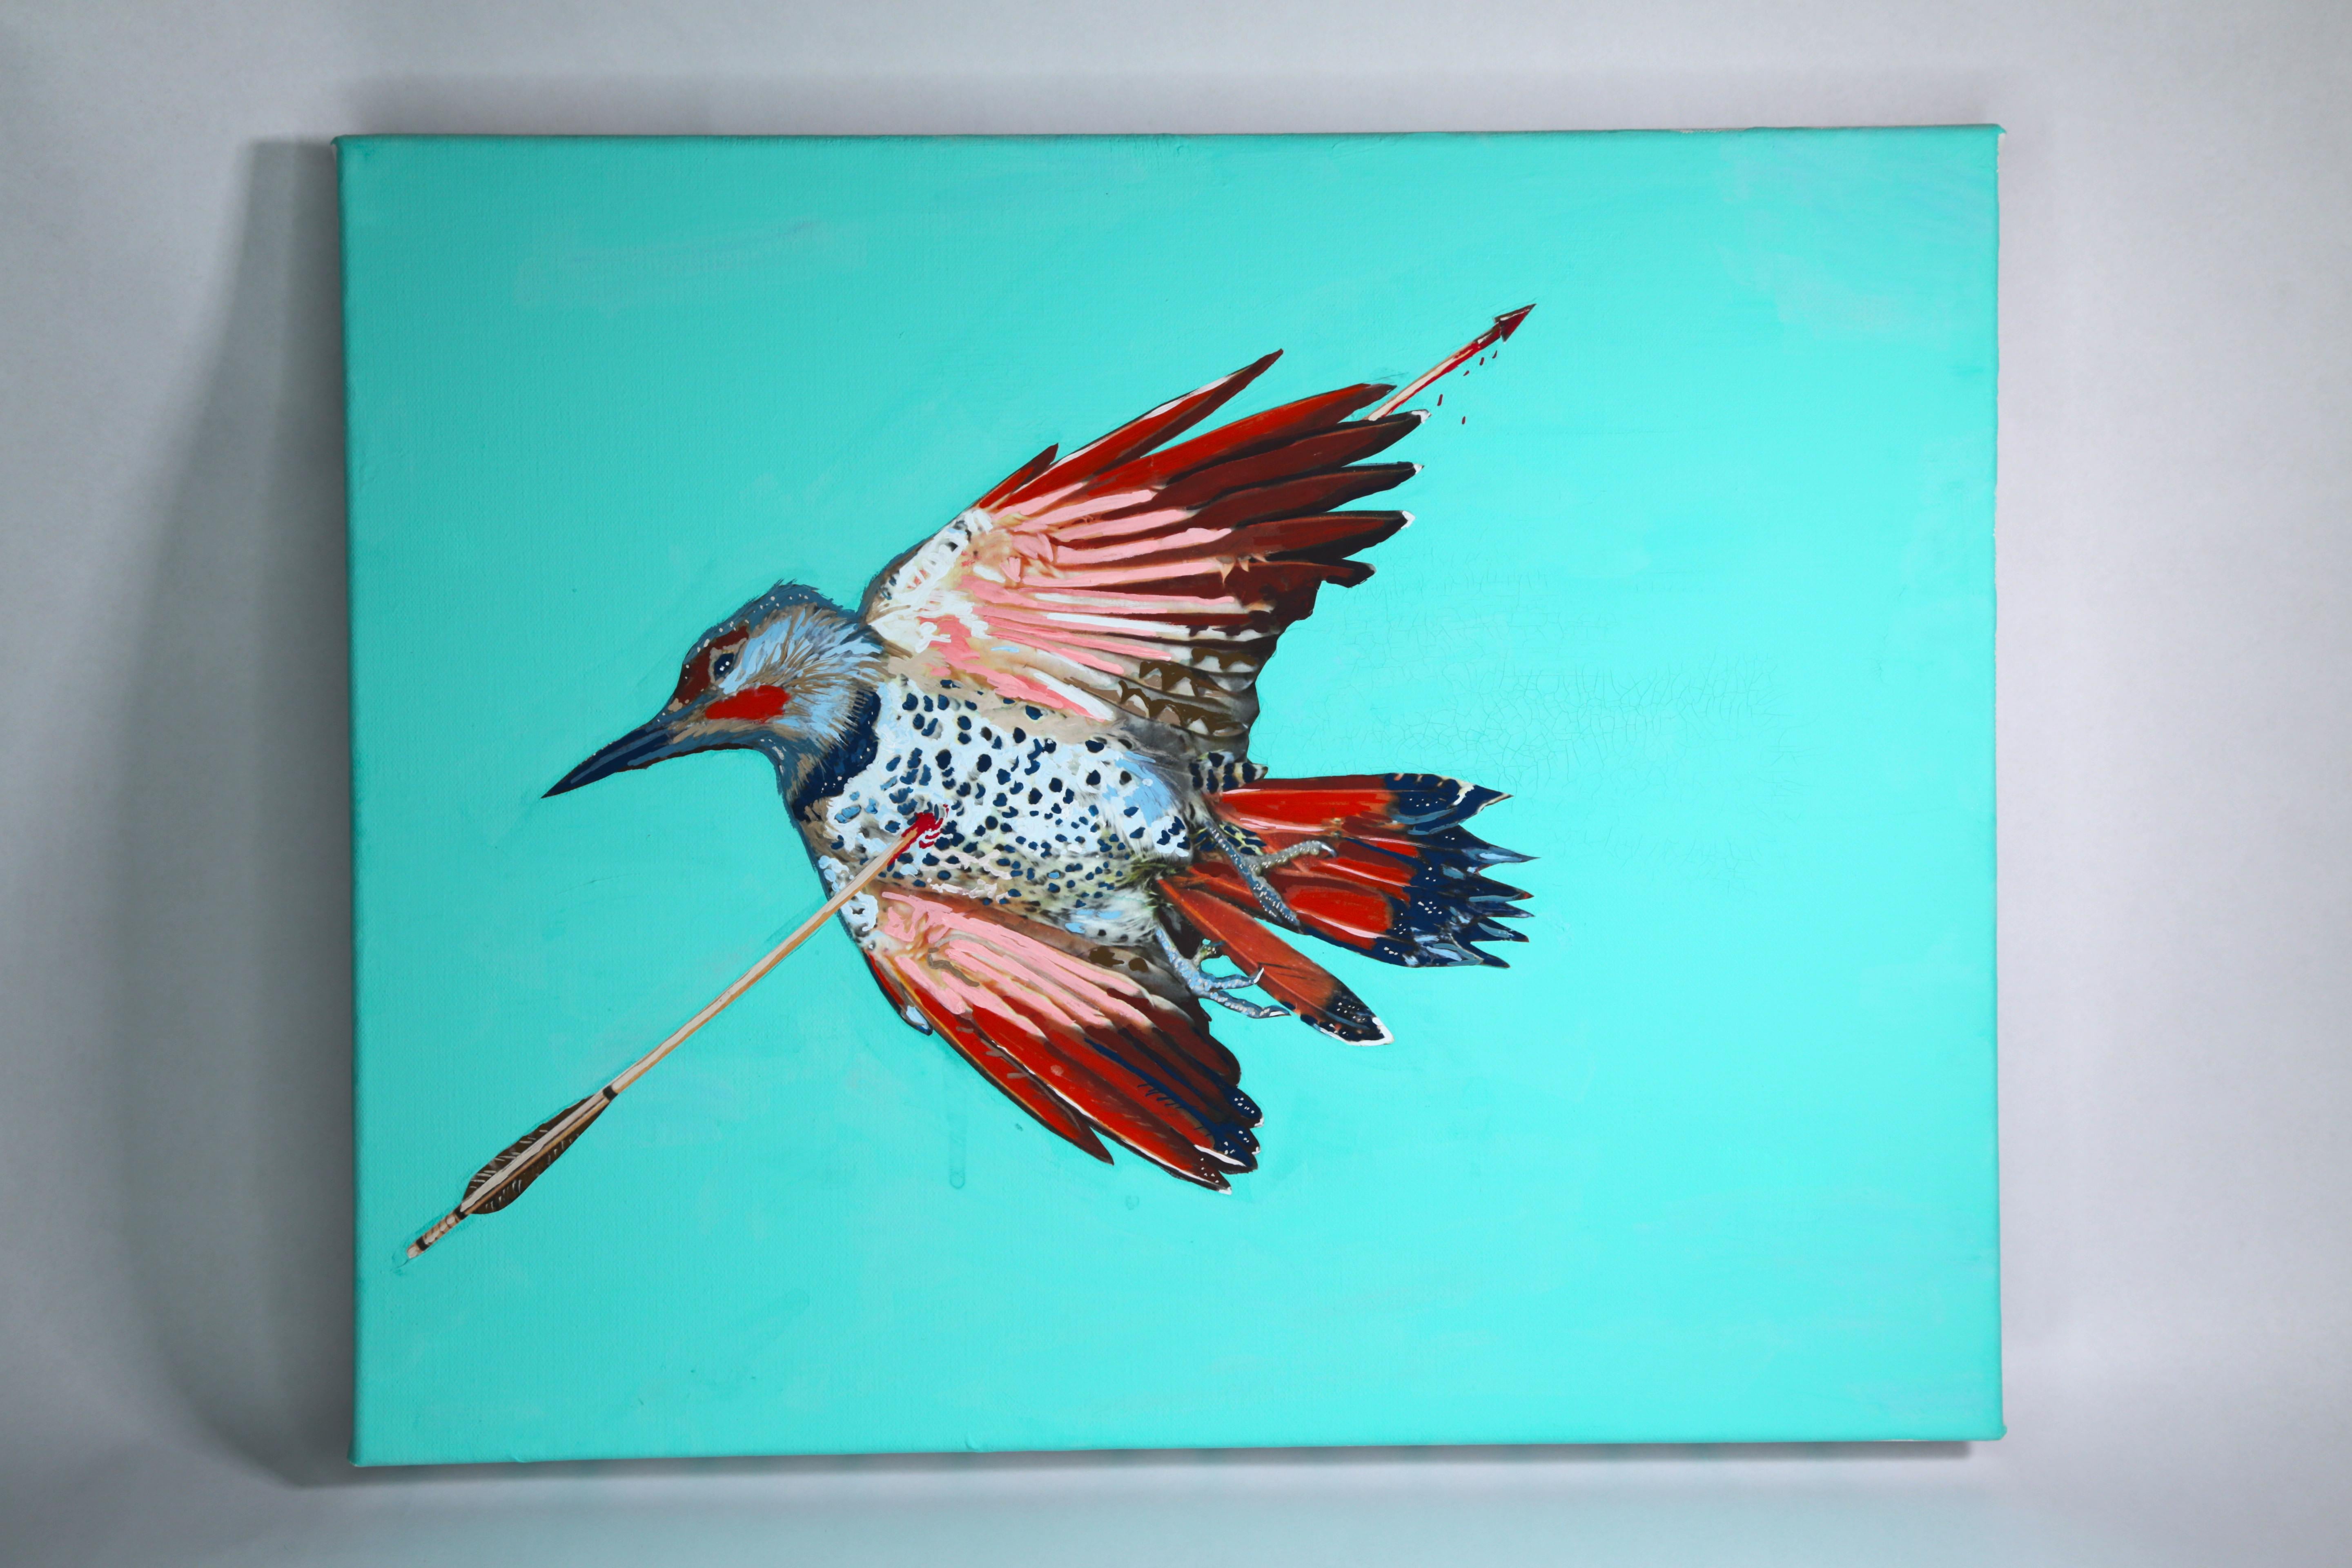 Ethan Minsker Animal Painting - Collage Painting on Canvas: 'Bird 5'